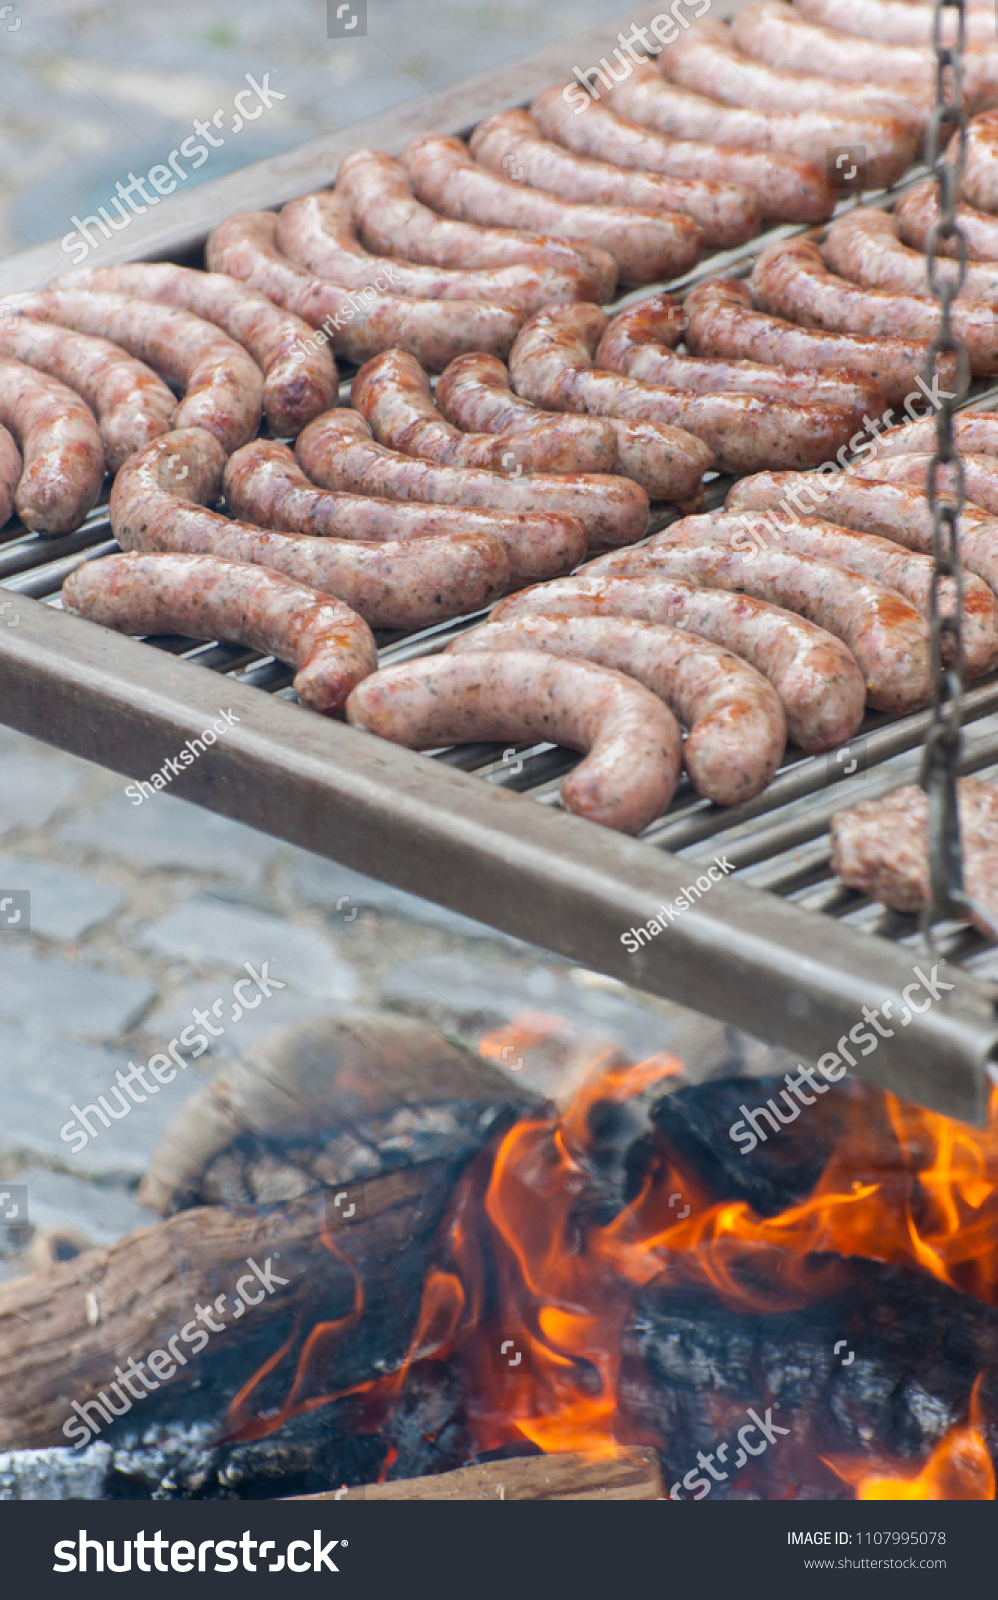 Sausages are grilled using a medieval method in Rothenburg ob der Tauber, Germany. #1107995078